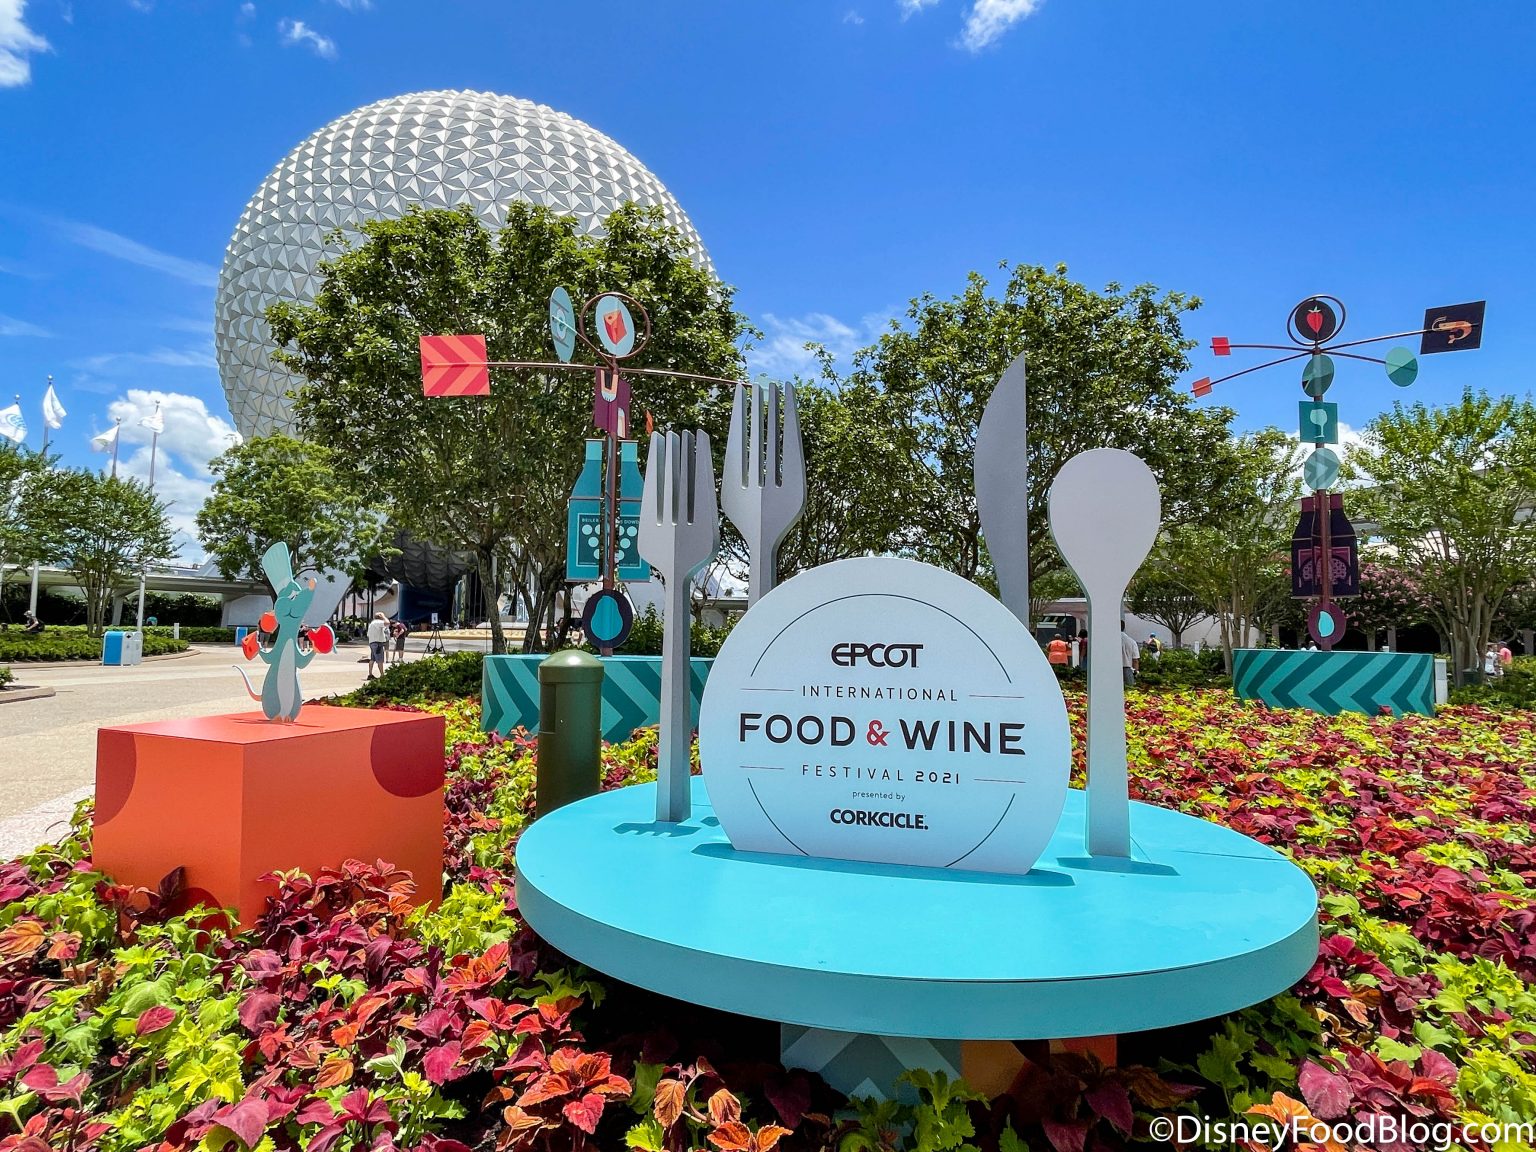 PHOTOS & VIDEOS! We're LIVE From the 2021 EPCOT International Food and